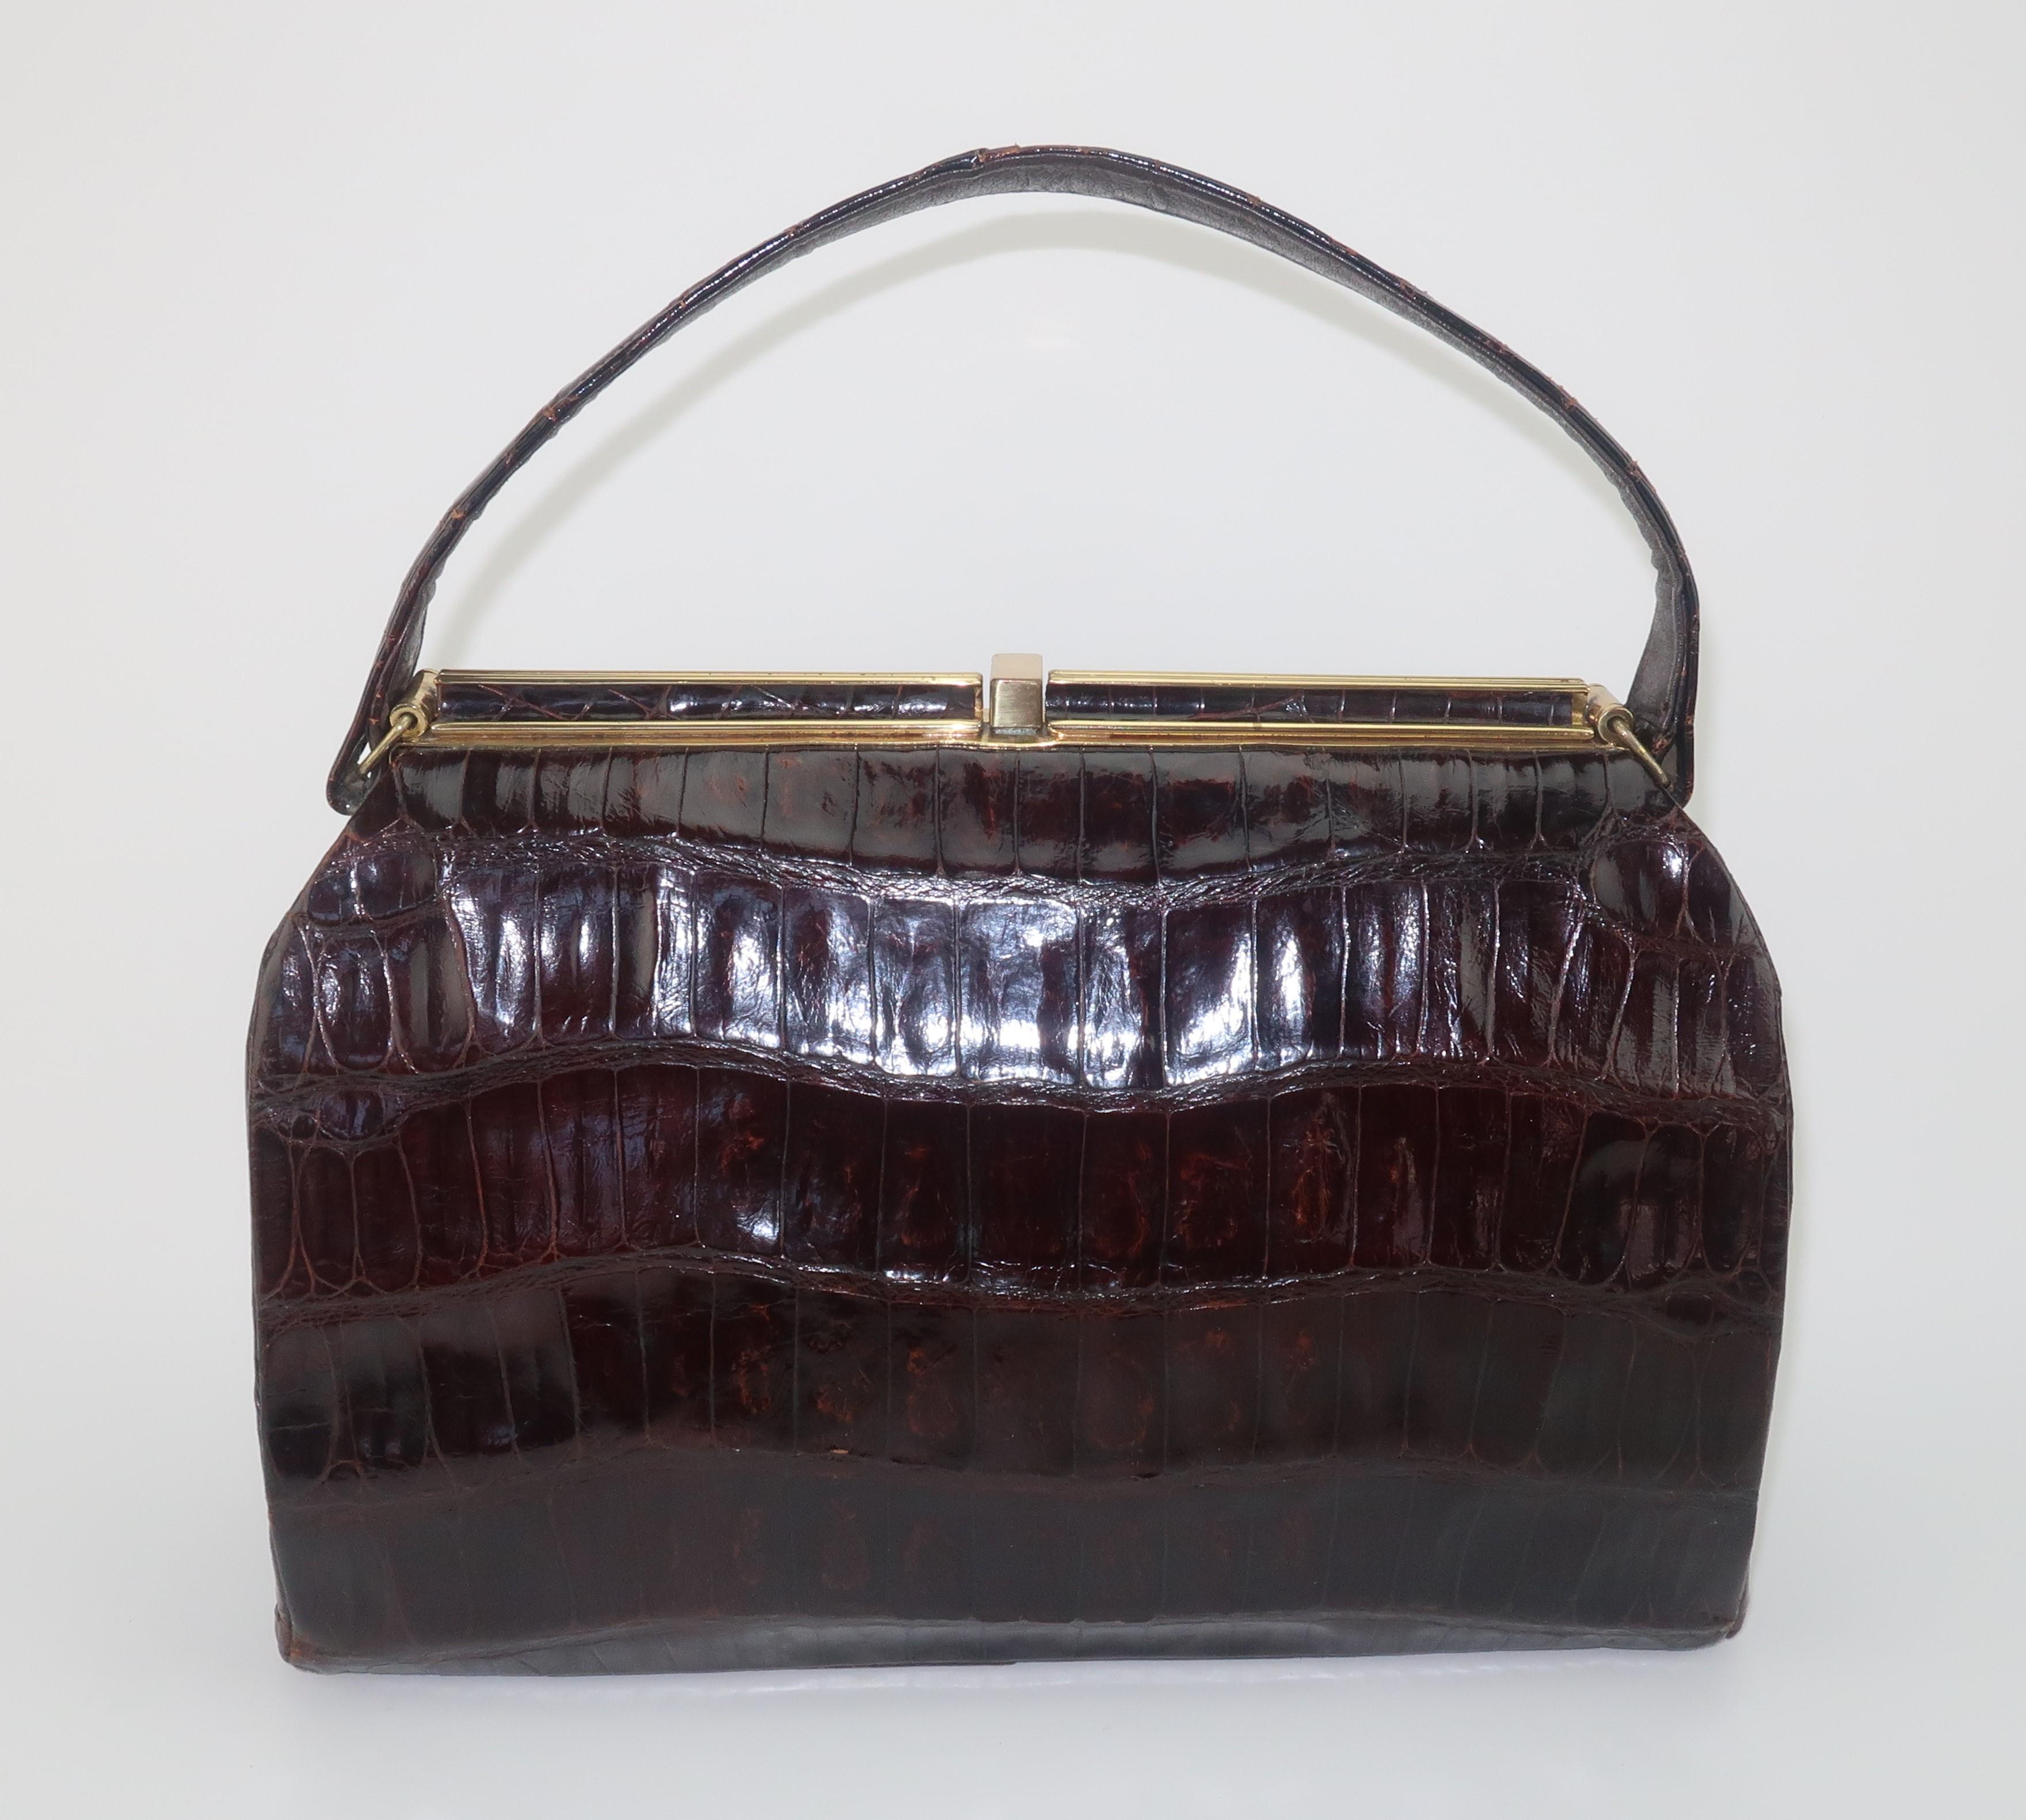 A 1950's classic brown alligator handbag prefect for an Alfred Hitchcock heroine ... think Grace Kelly, Tippi Hedren or Kim Novak. The classic top handle silhouette has a brass frame with a push button that opens to reveal a beige leather lined